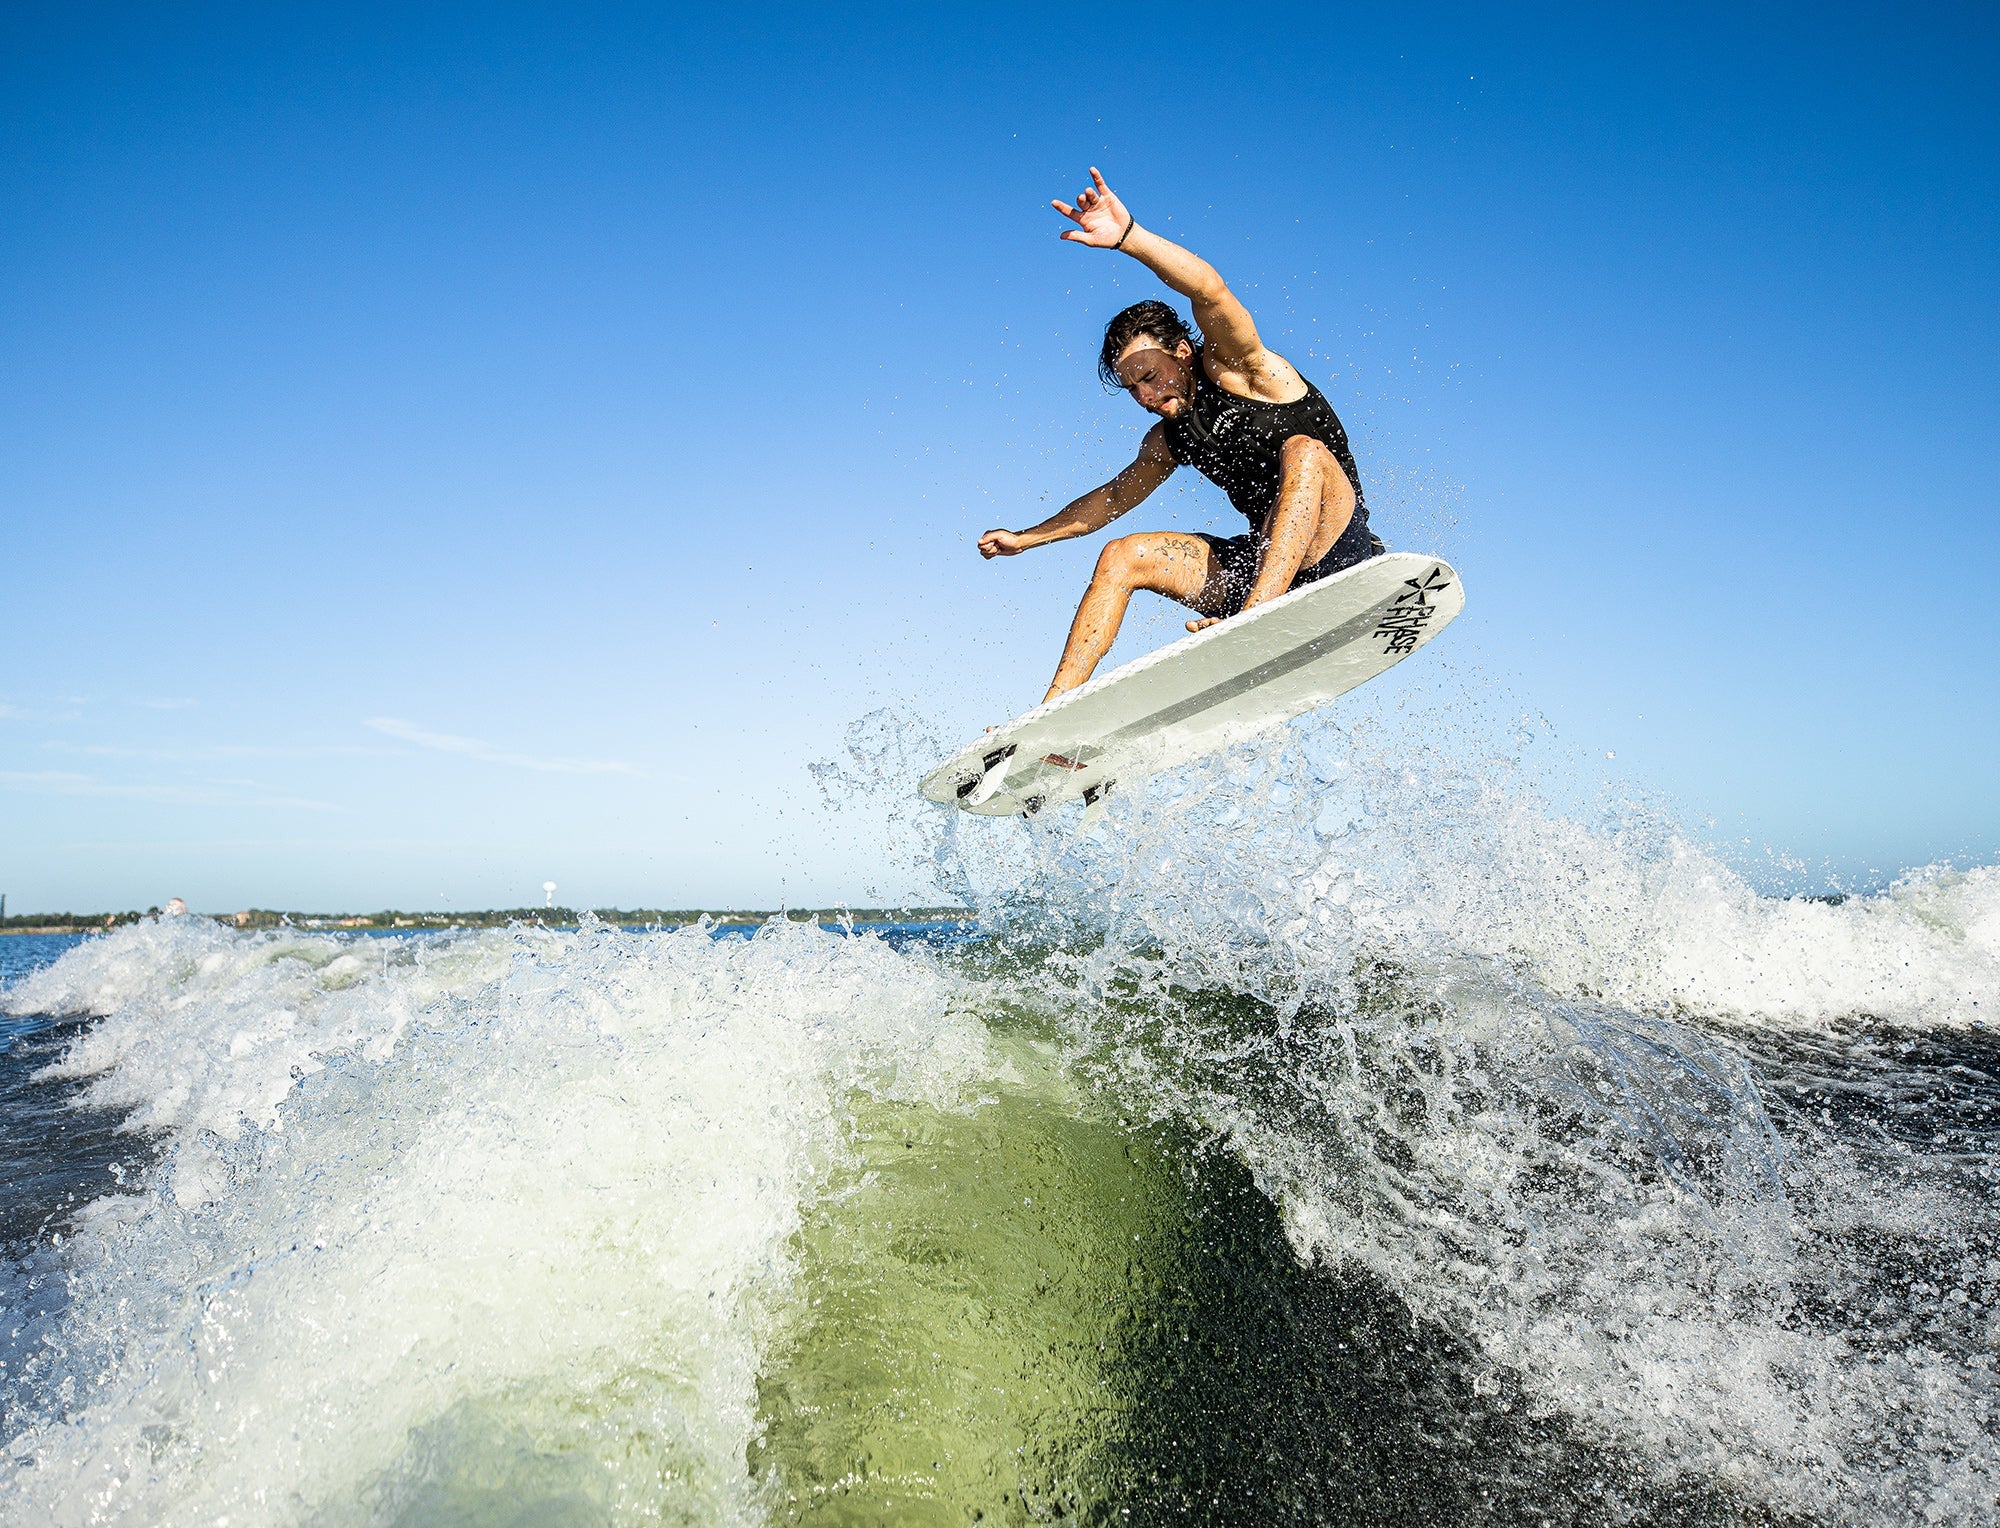 A big guy surfer rides a wave on a Phase 5 2023 Doctor Wakesurf Board equipped with the FLEXTec V2 surf fin.